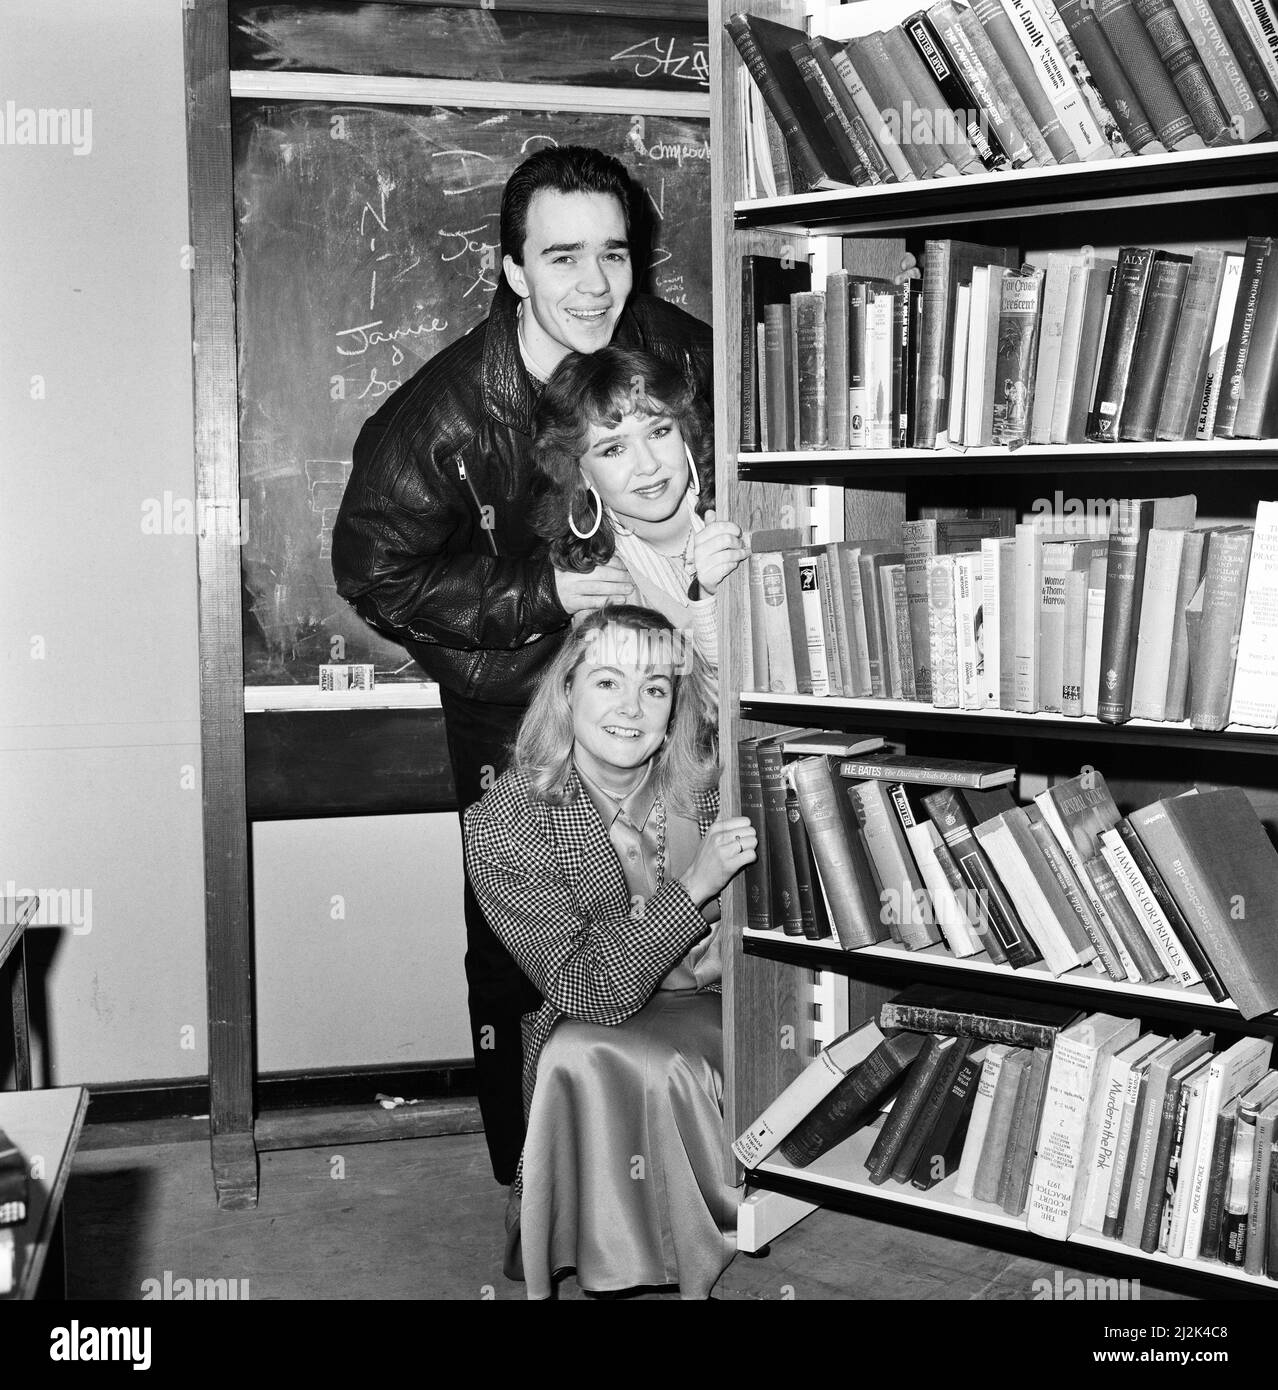 Past and present members of the cast of the BBC children's television series Grange Hill celebrate the programme's 10th anniversary at the BBC in Borehamwood, Hertfordshire. Top to bottom: Todd Carty, Susan Tully and Alison Bettles. 3rd February 1987. Stock Photo